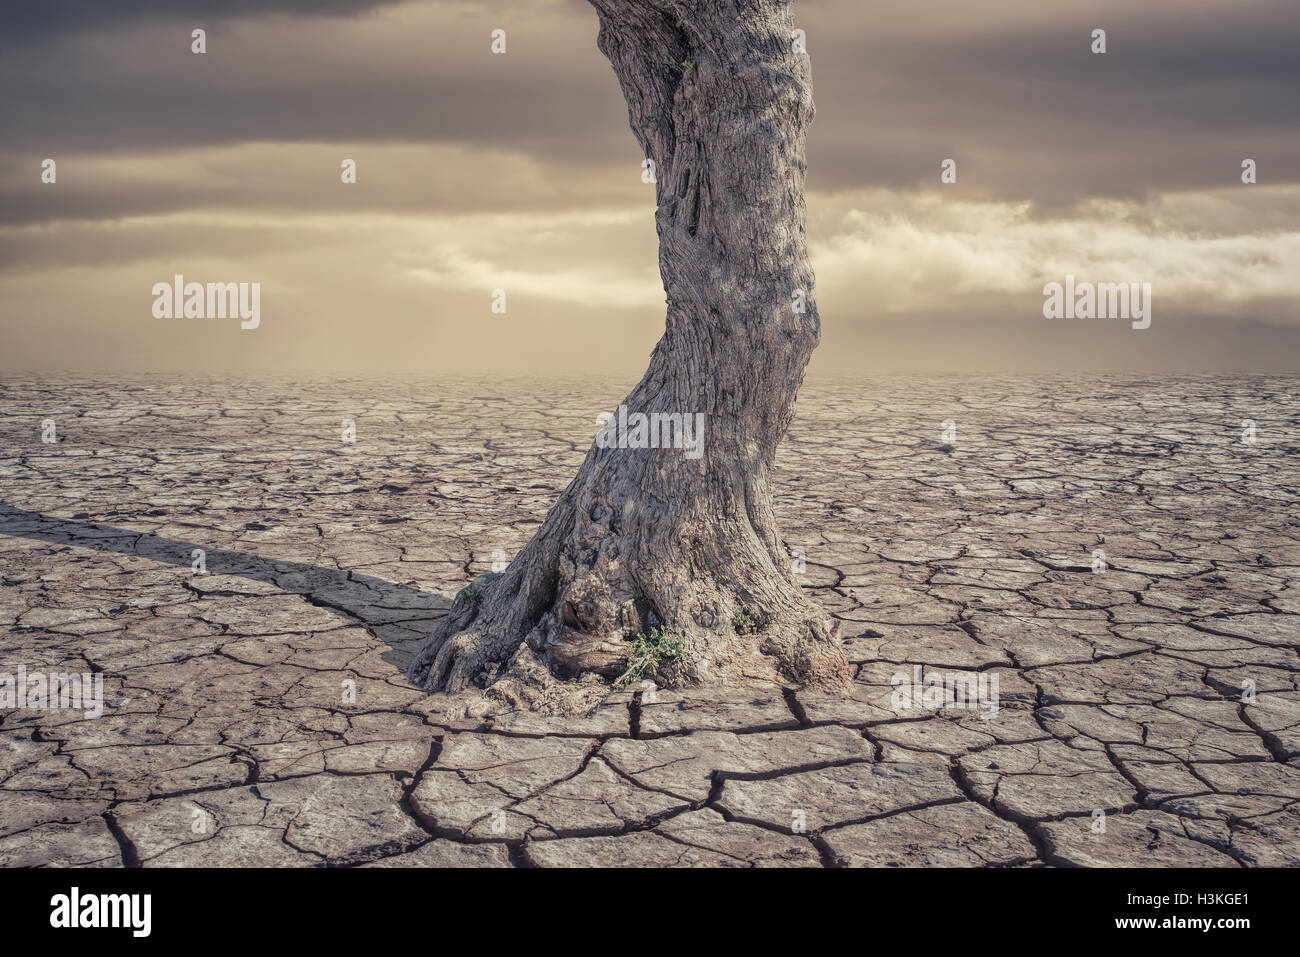 Drought Land and lonely tree Stock Photo